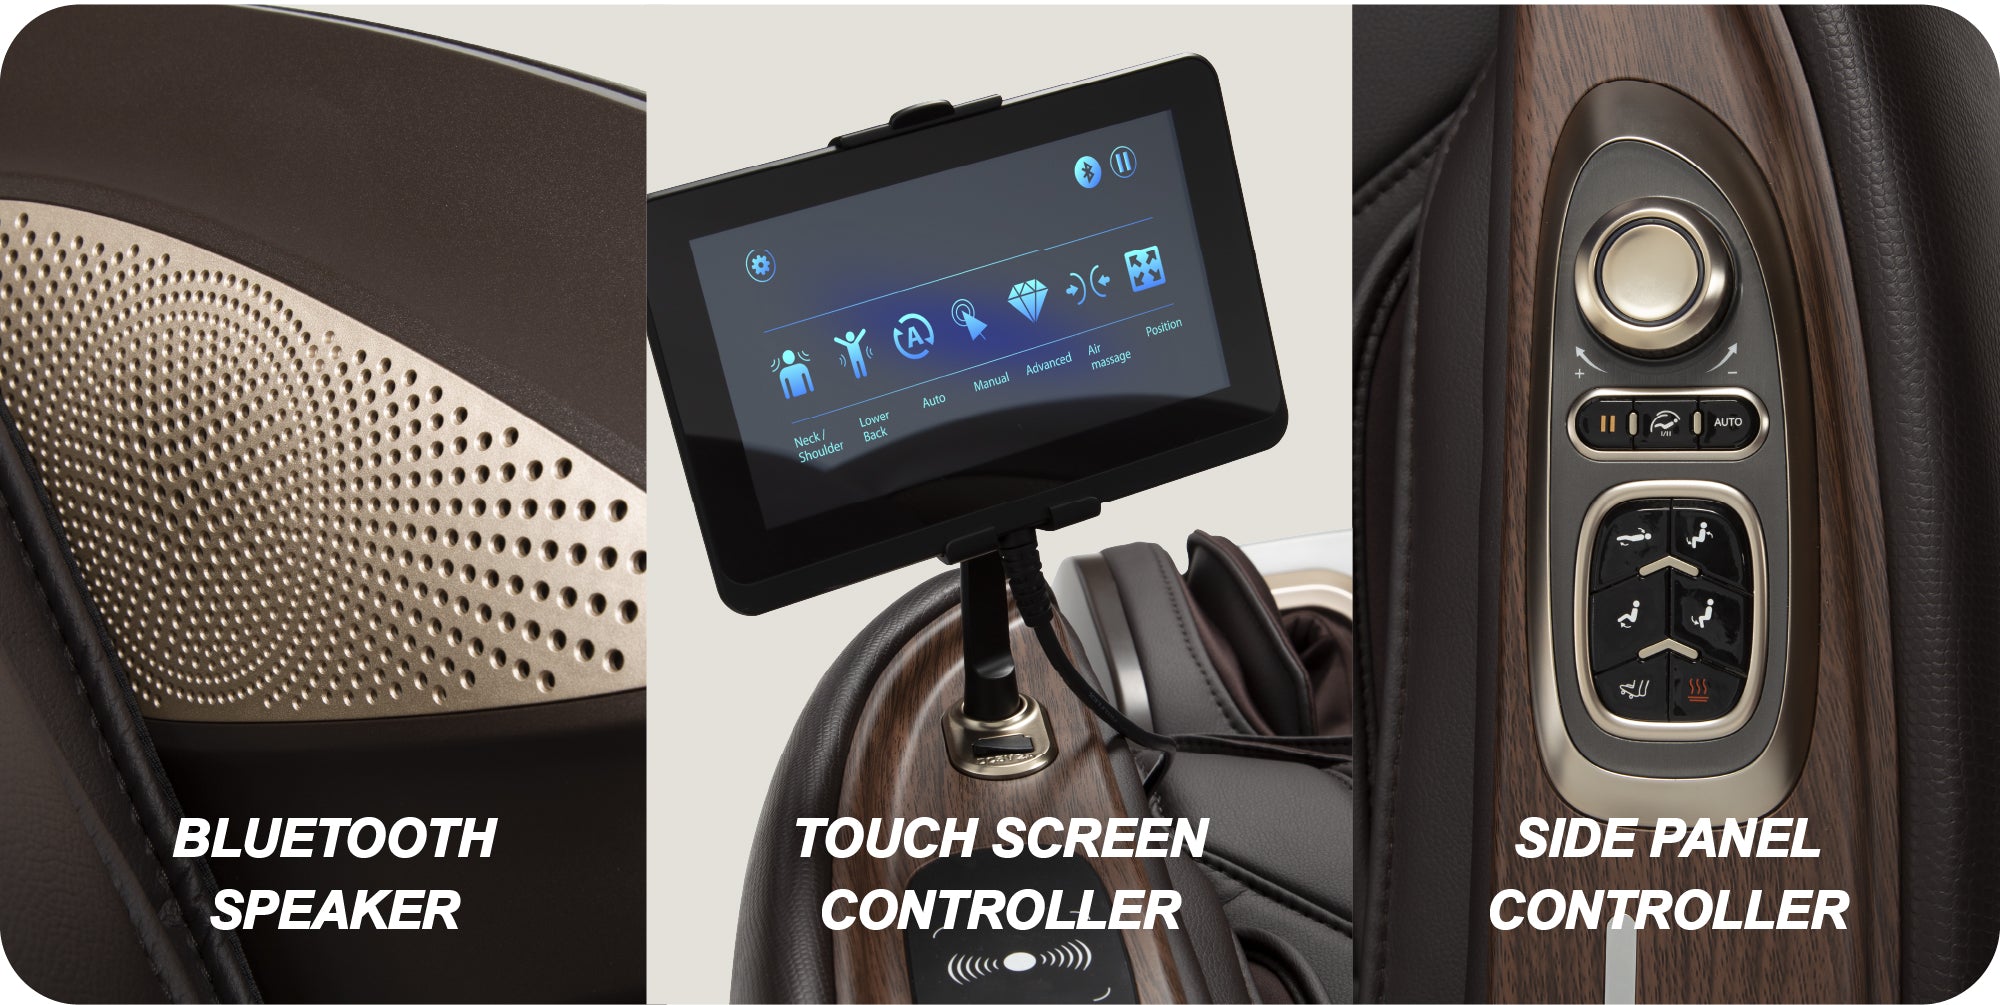 bluetooth speaker, touch screen controller, side panel controller